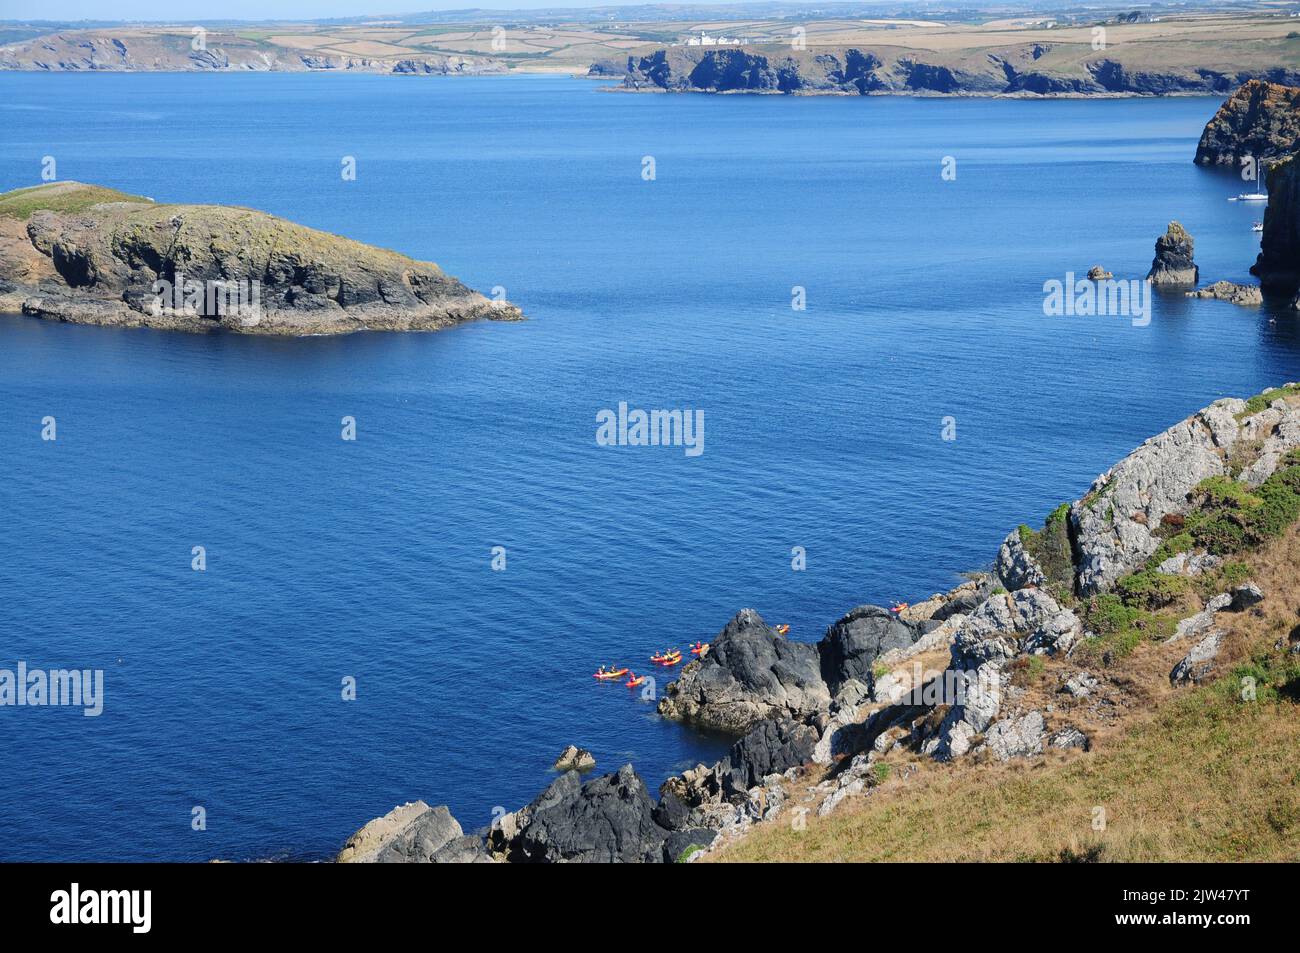 Kayakers explore the rocky coastline on a calm day near Mullion Cove, Cornwall Stock Photo